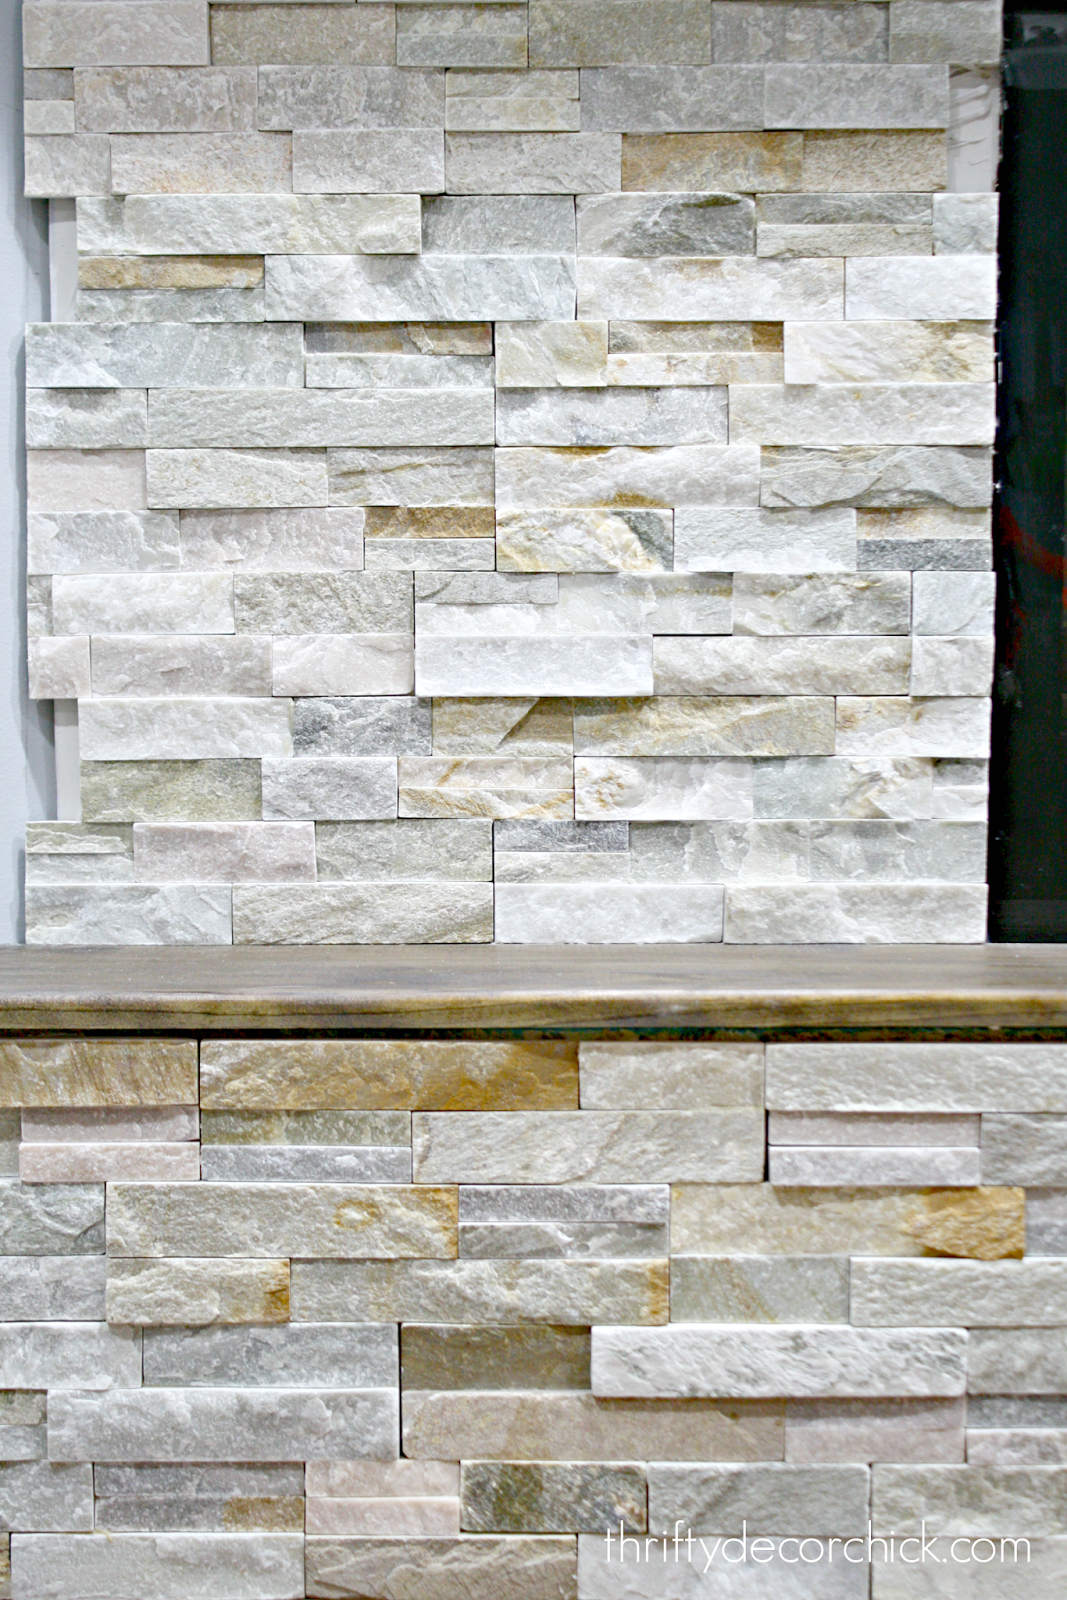 How to Install Stacked Stone Tile on a Fireplace | Thrifty Decor Chick |  Thrifty DIY, Decor and Organizing